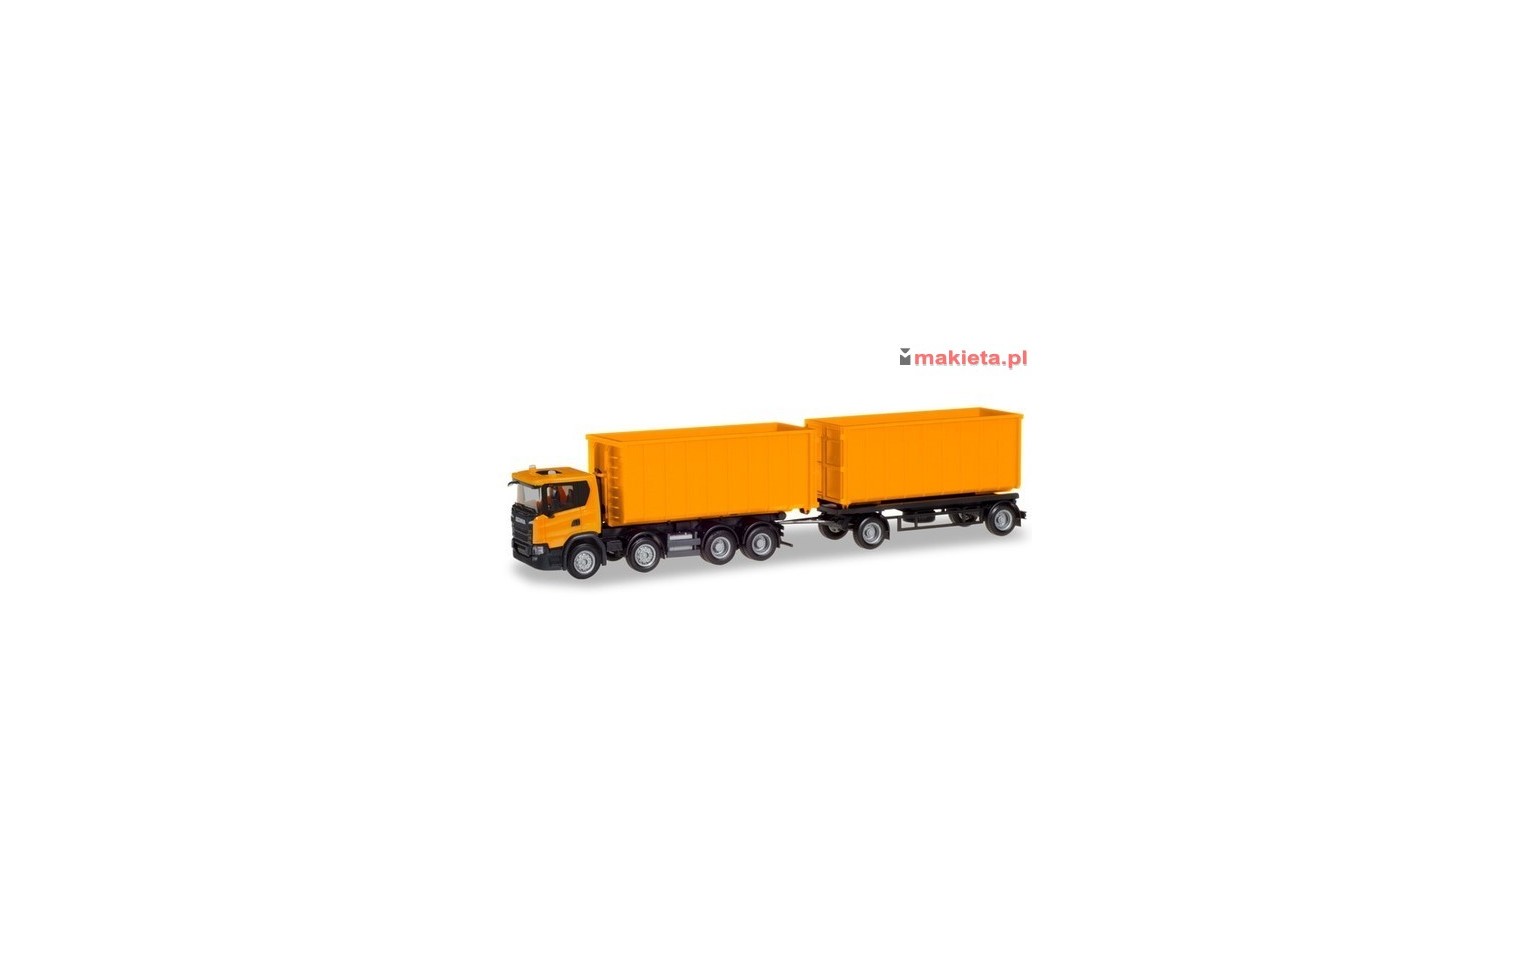 Herpa 309950, Scania CG 17 8×4 roll-off container trailer, skala H0.